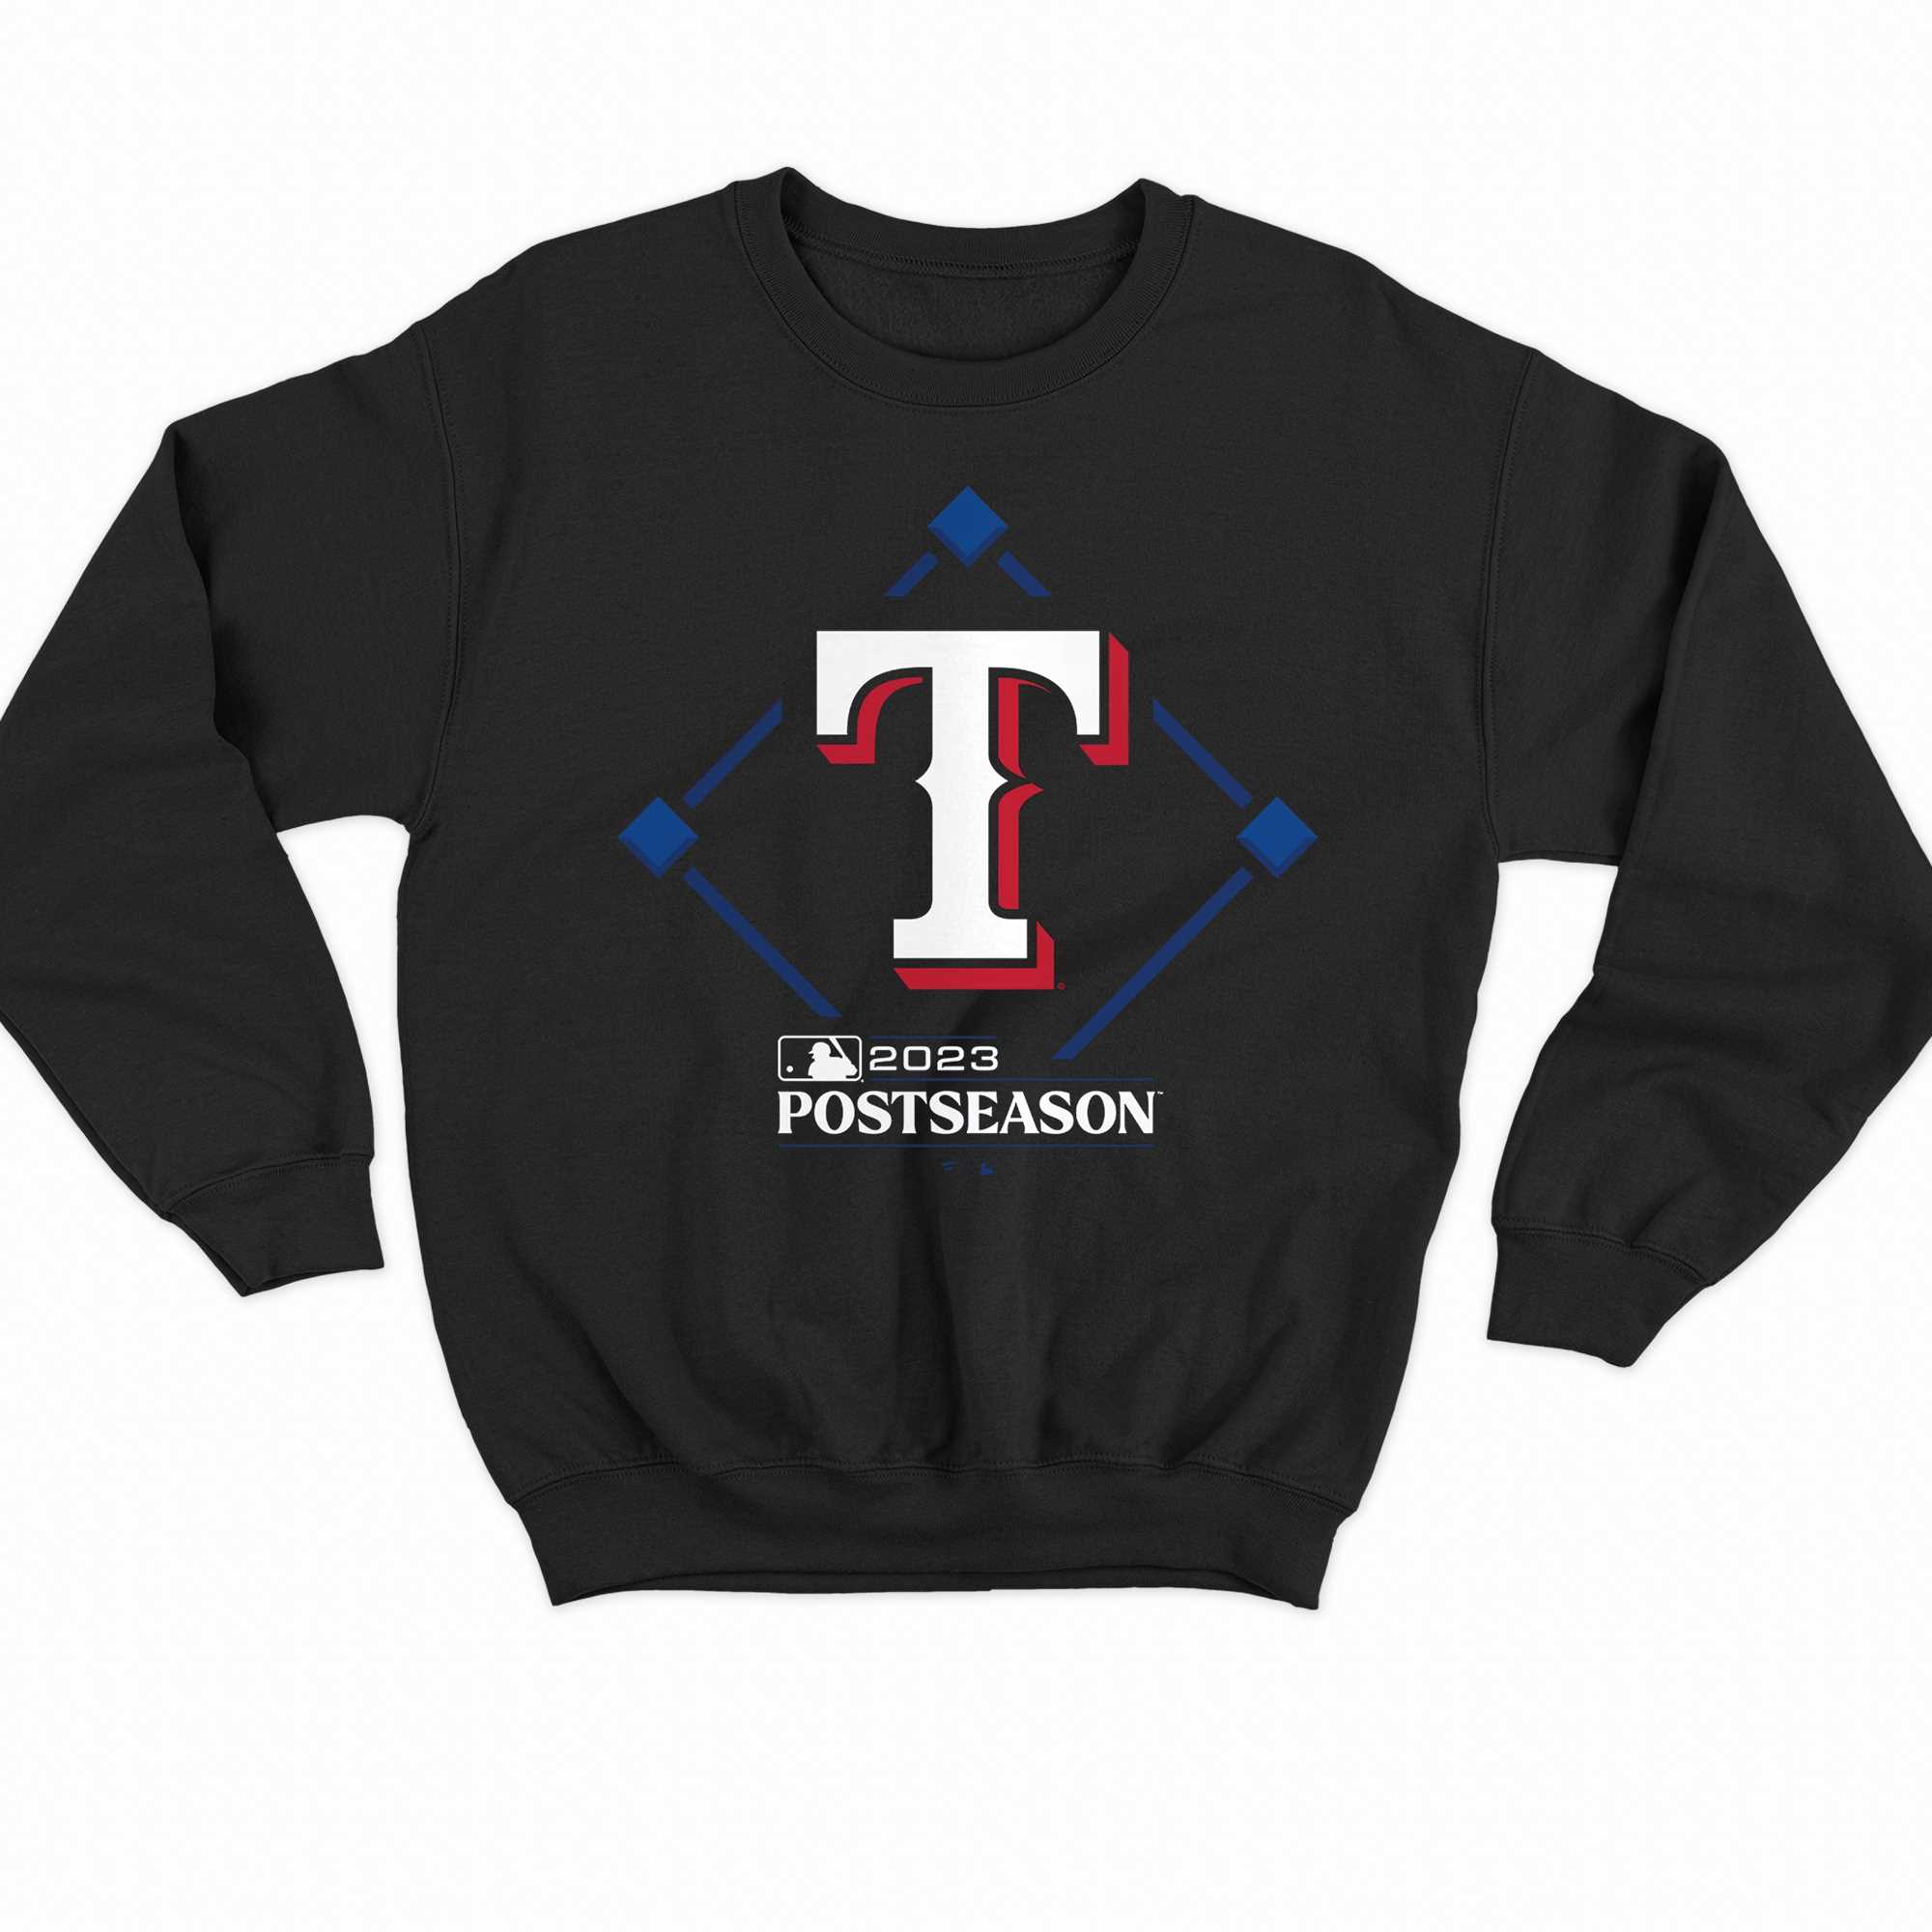 Black Youth Texas Rangers Pullover Jersey